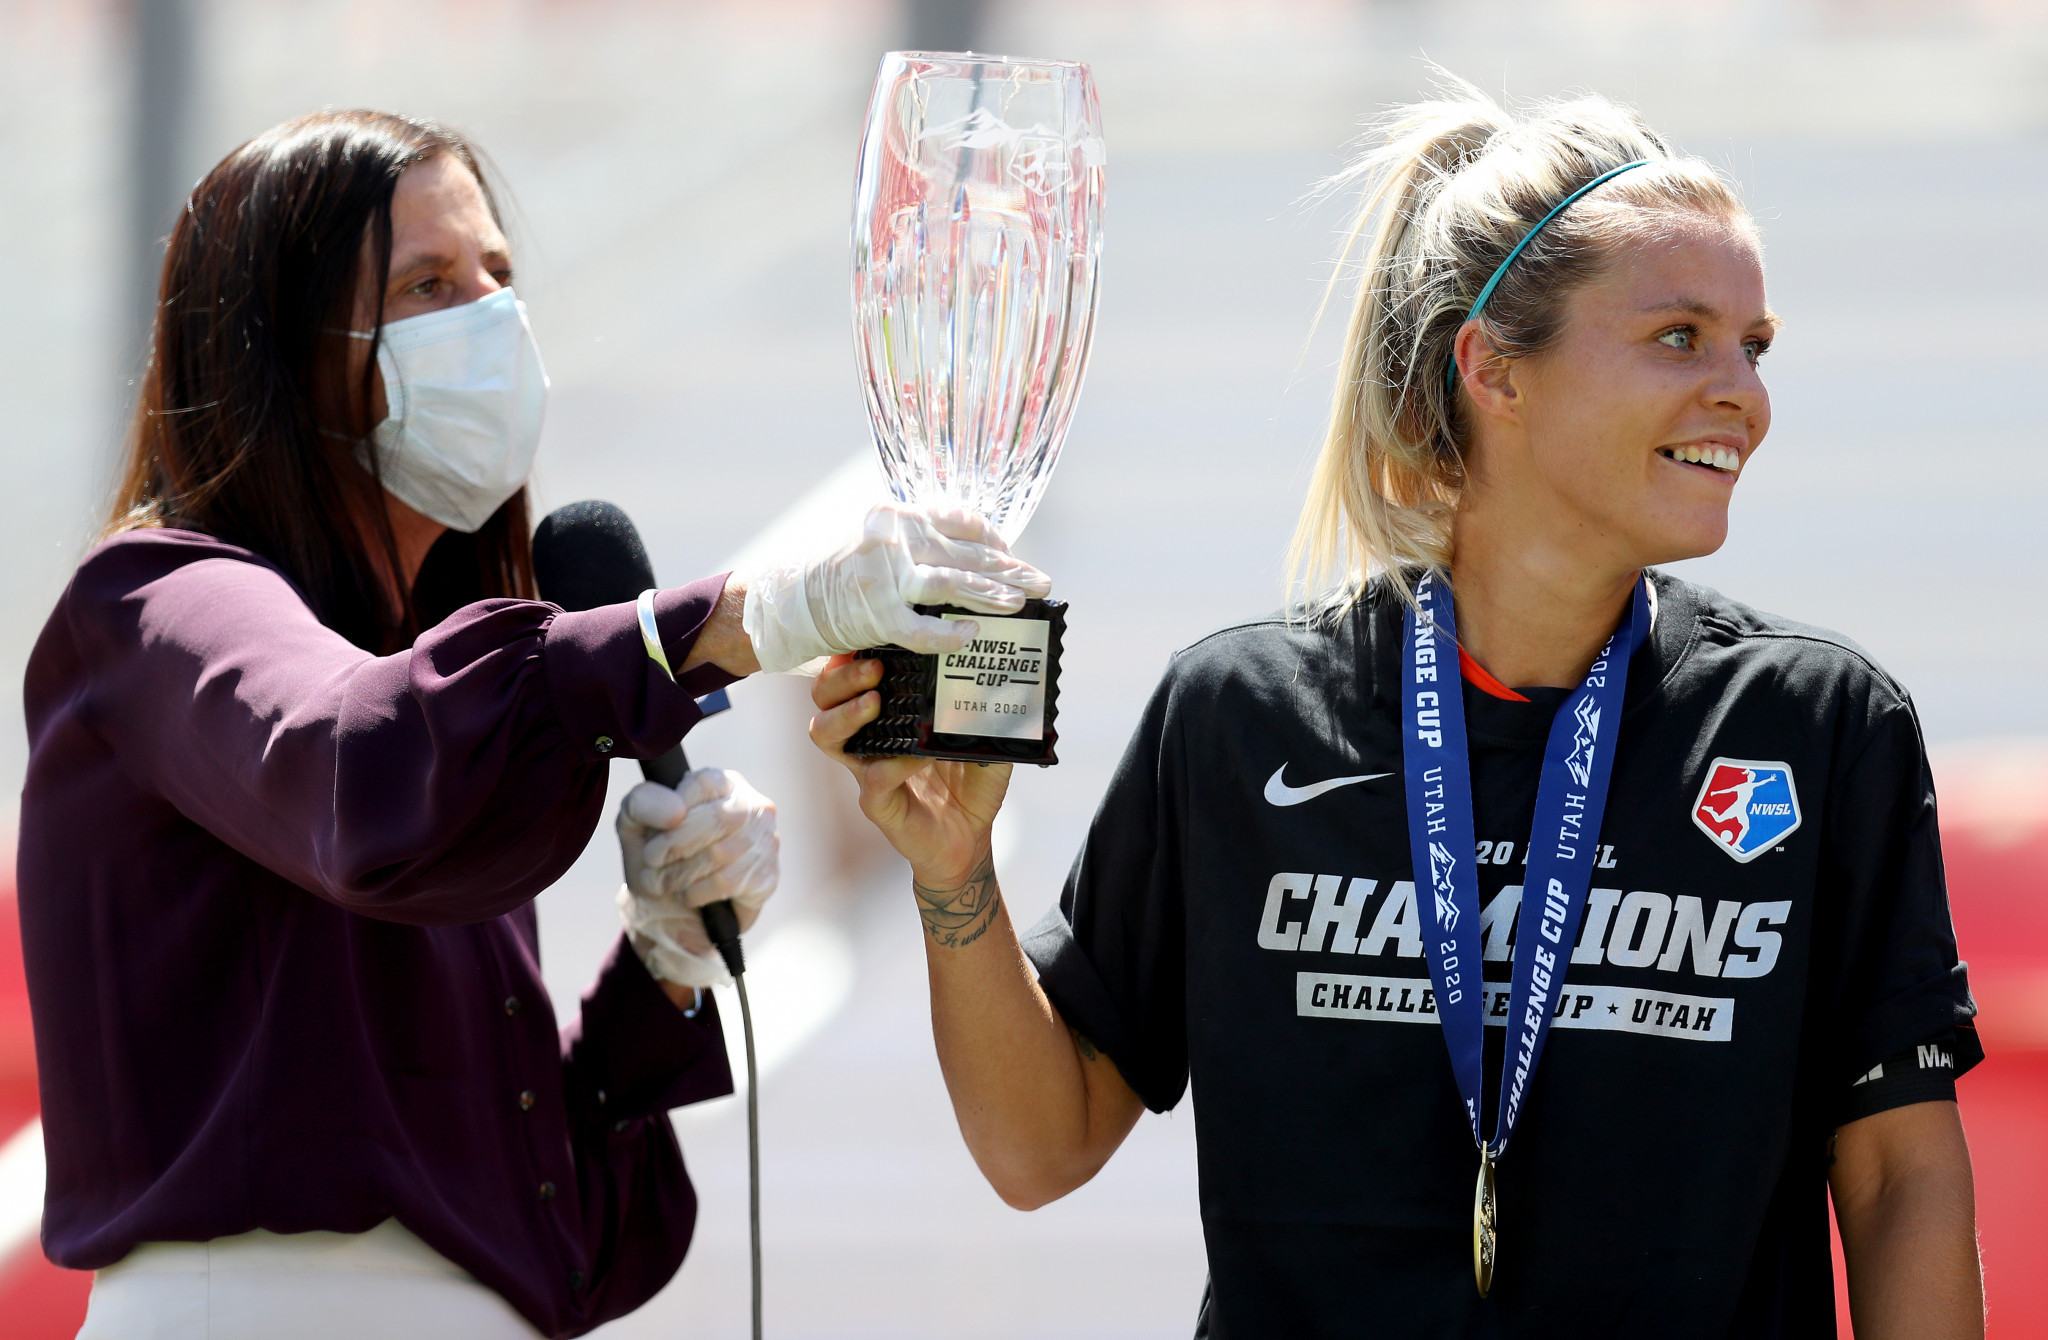 The NWSL Challenge Cup took place with strict COVID-19 protocol in place ©Getty Images